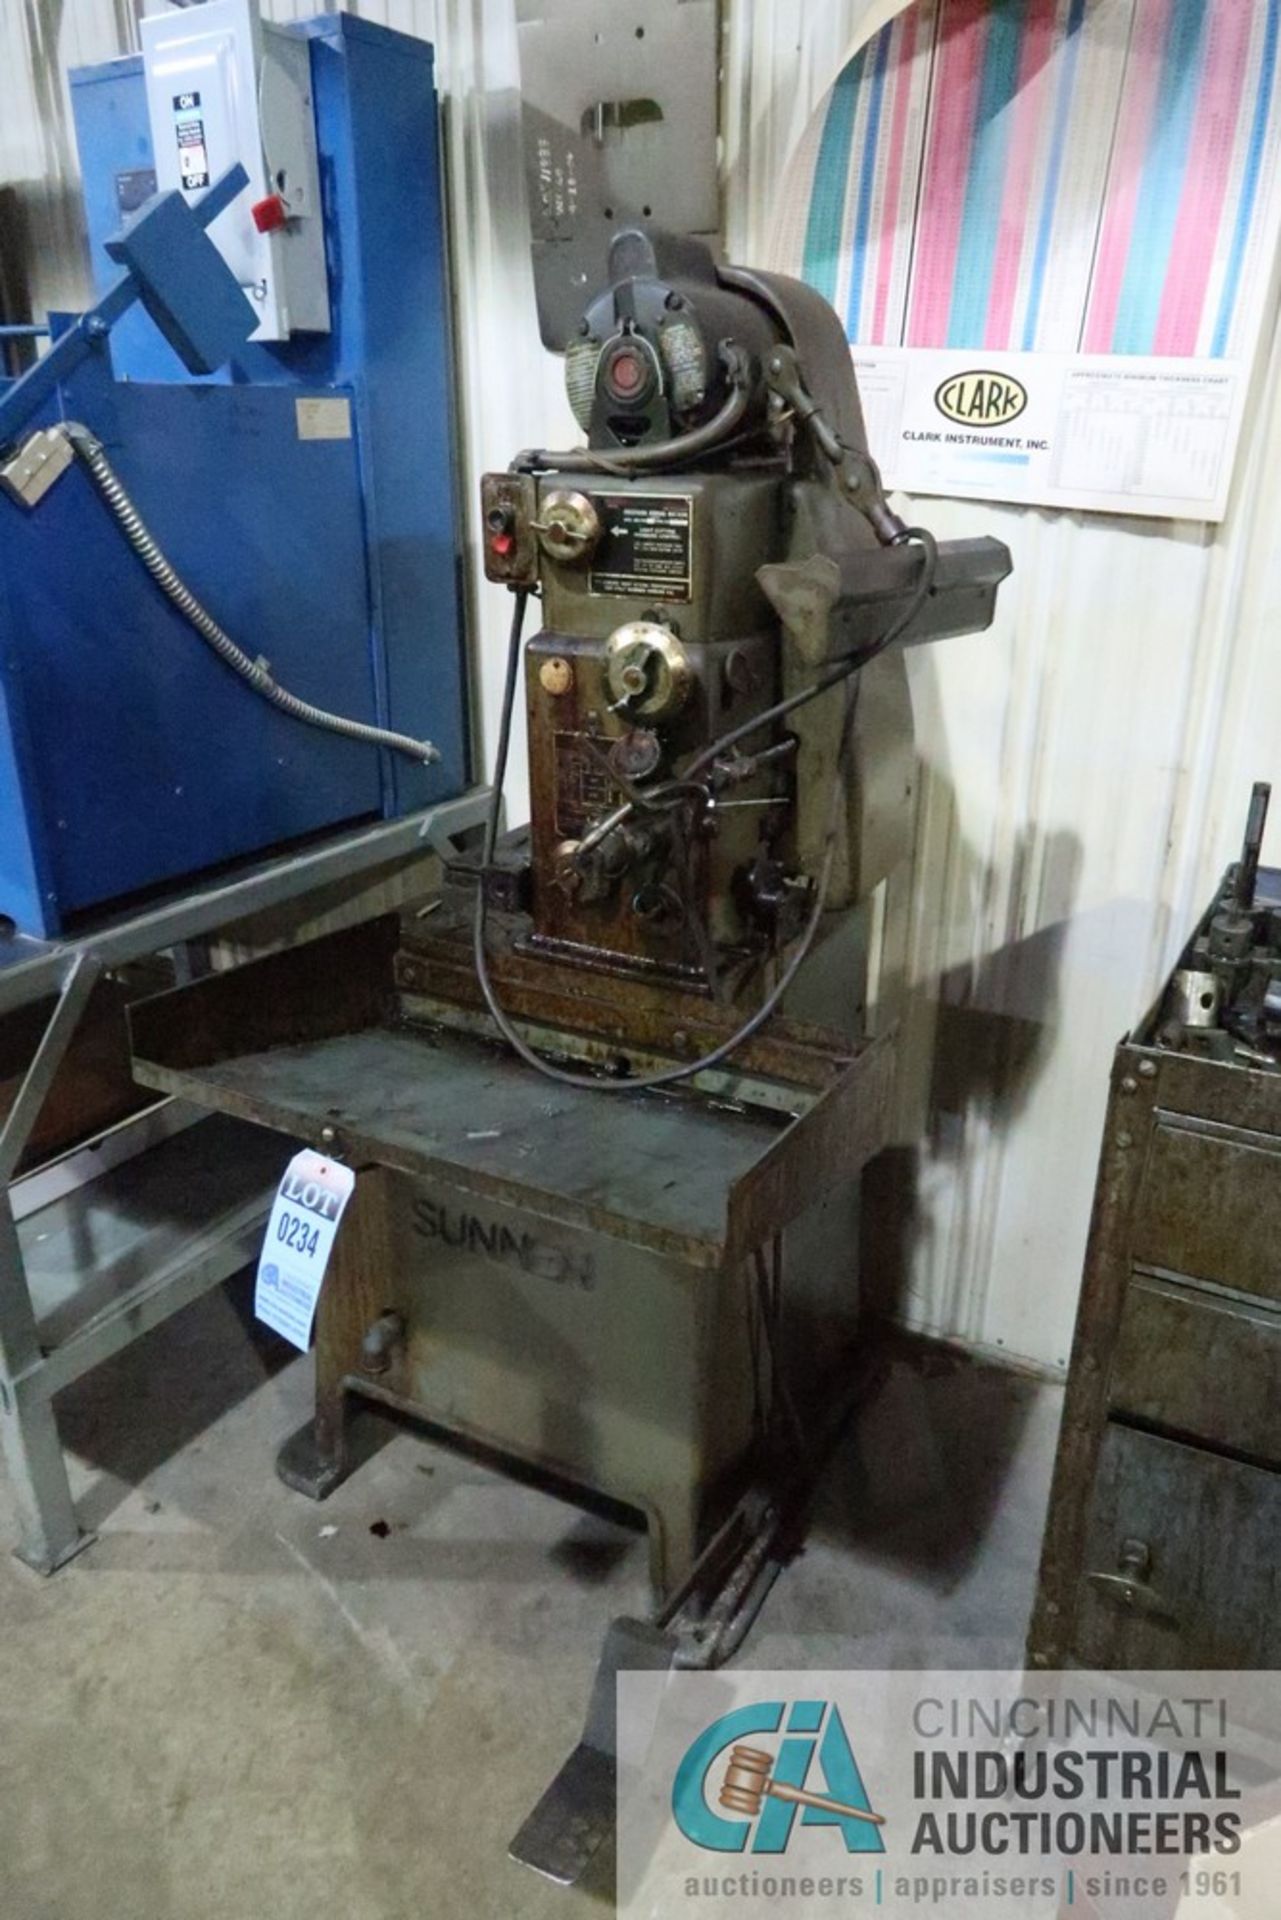 SUNNEN MODEL MBB-1600 PRECISION HONING MACHINE; S/N 41195, 1/2 HP WITH MISCELLANEOUS NEW TOOLING, - Image 2 of 18